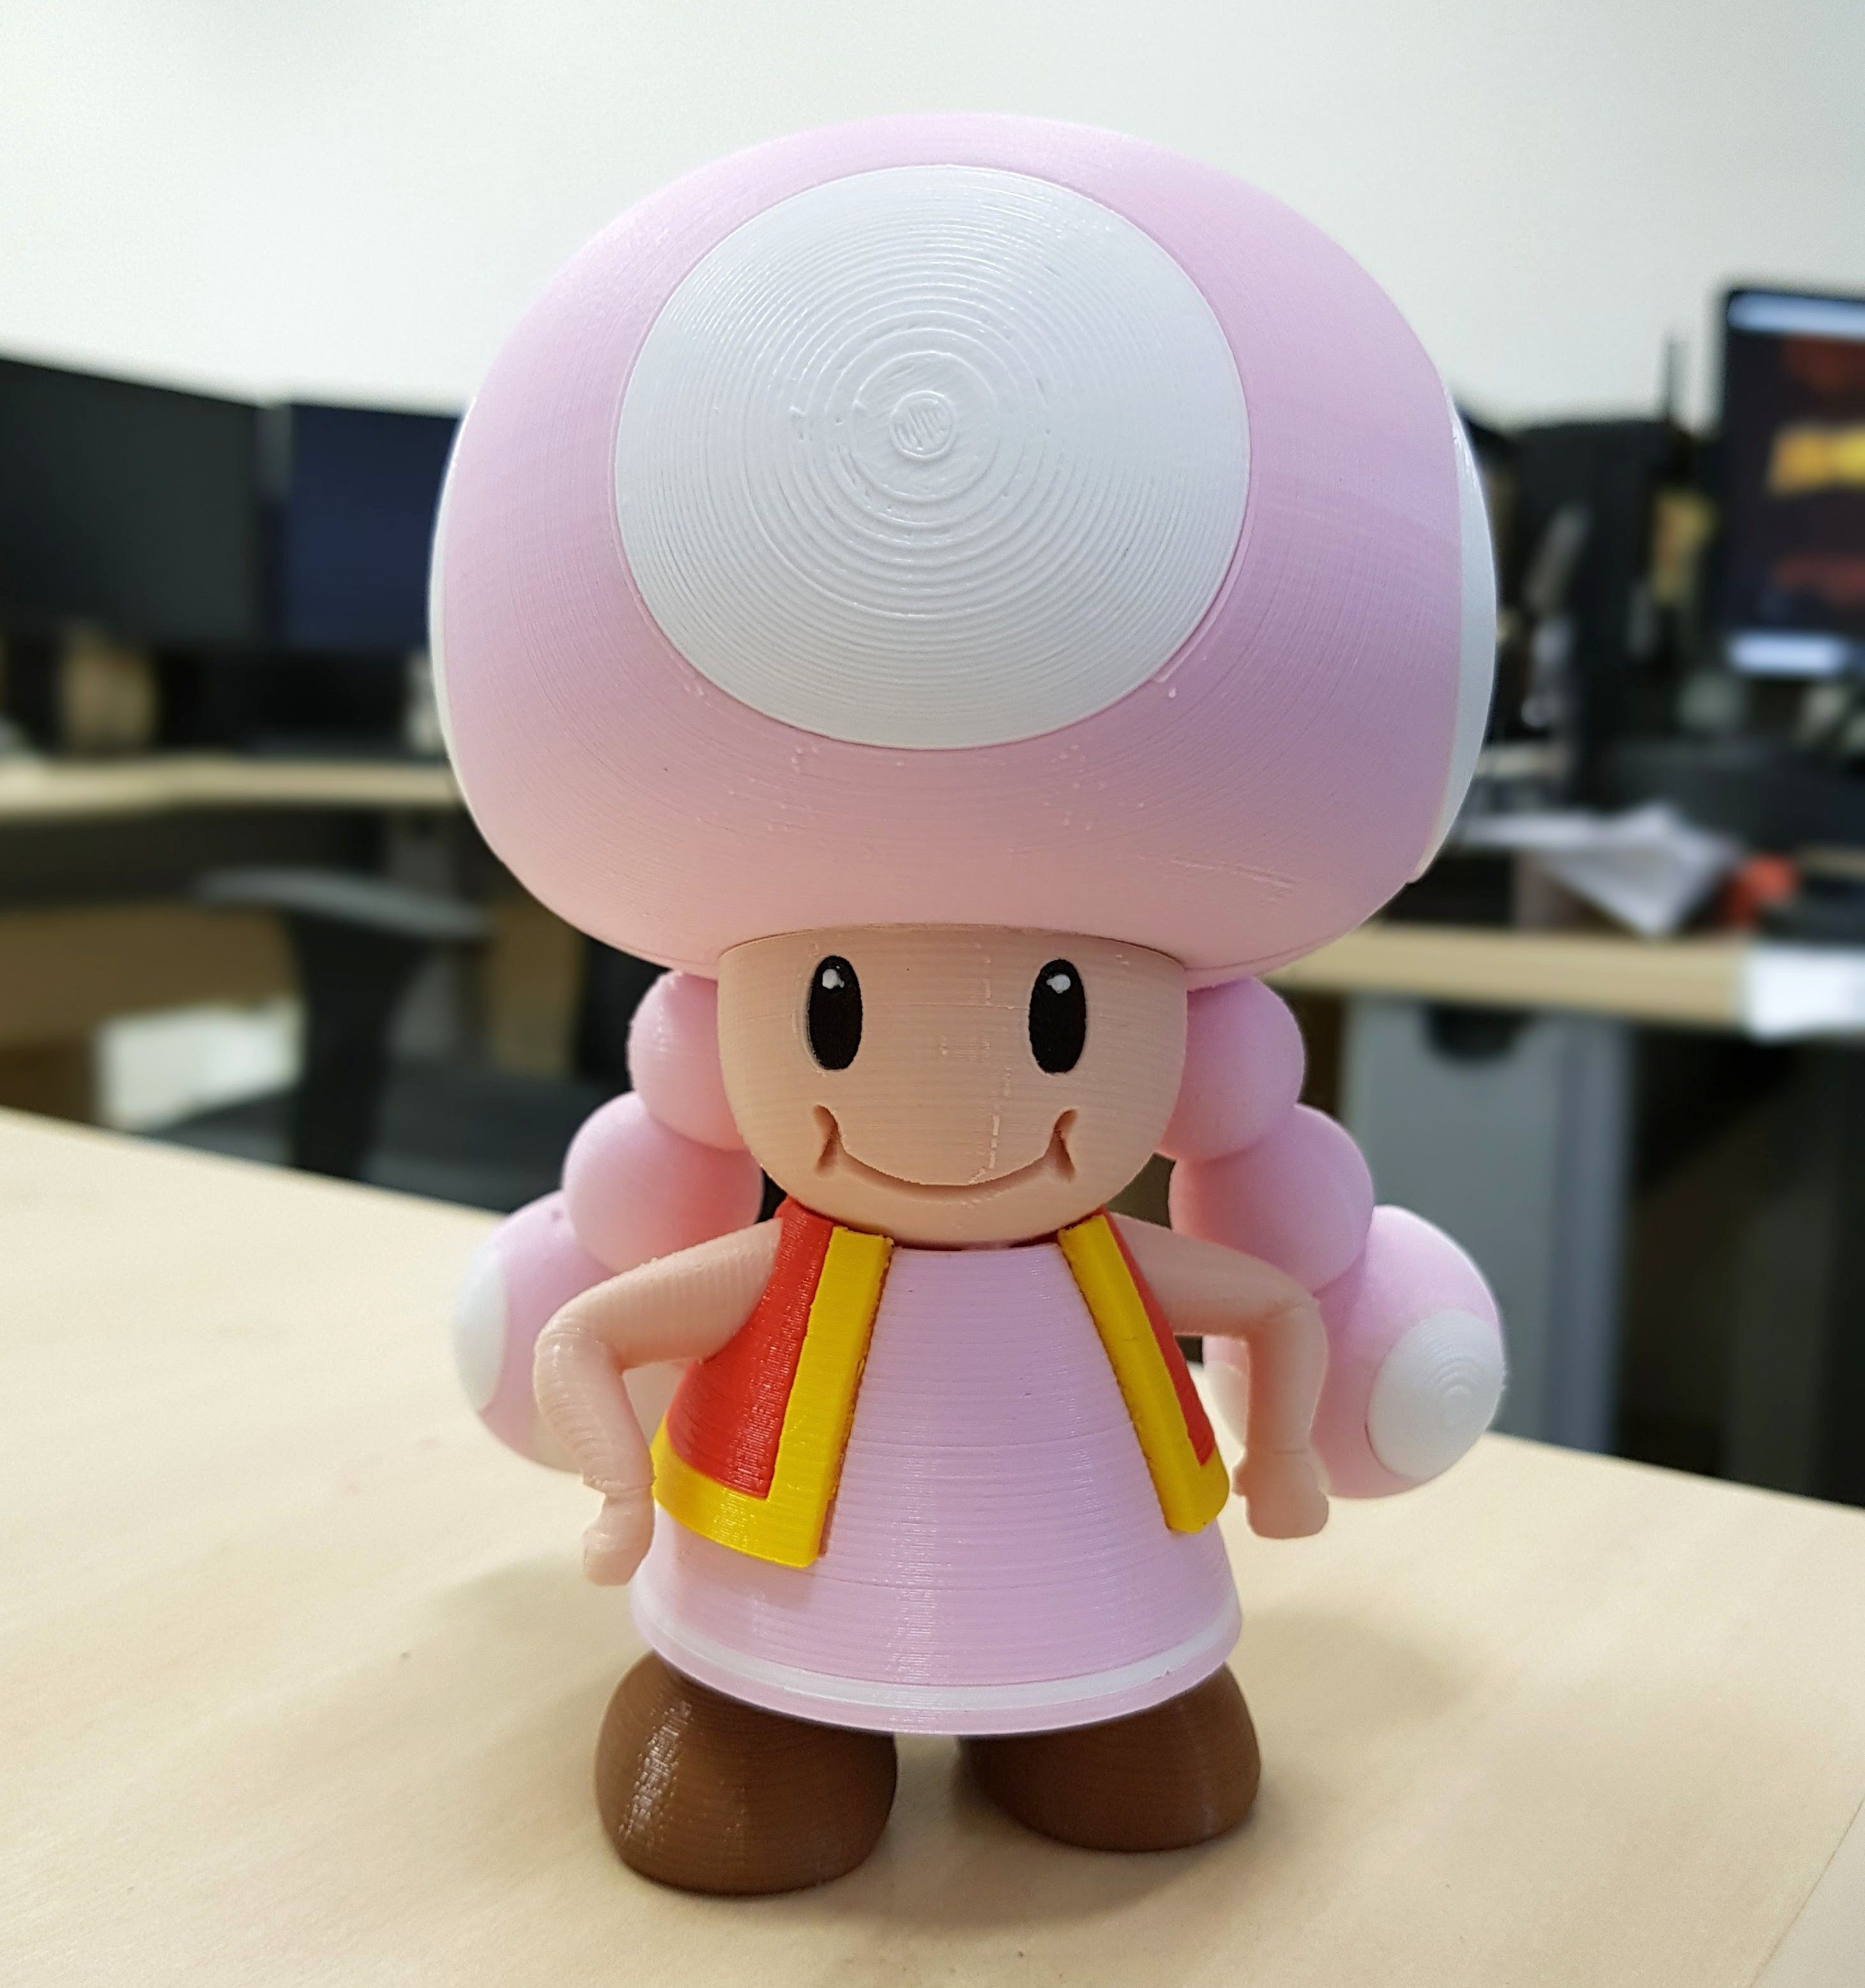 01.jpg Download free STL file Toadette from Mario games - Multi-color • 3D print object, bpitanga